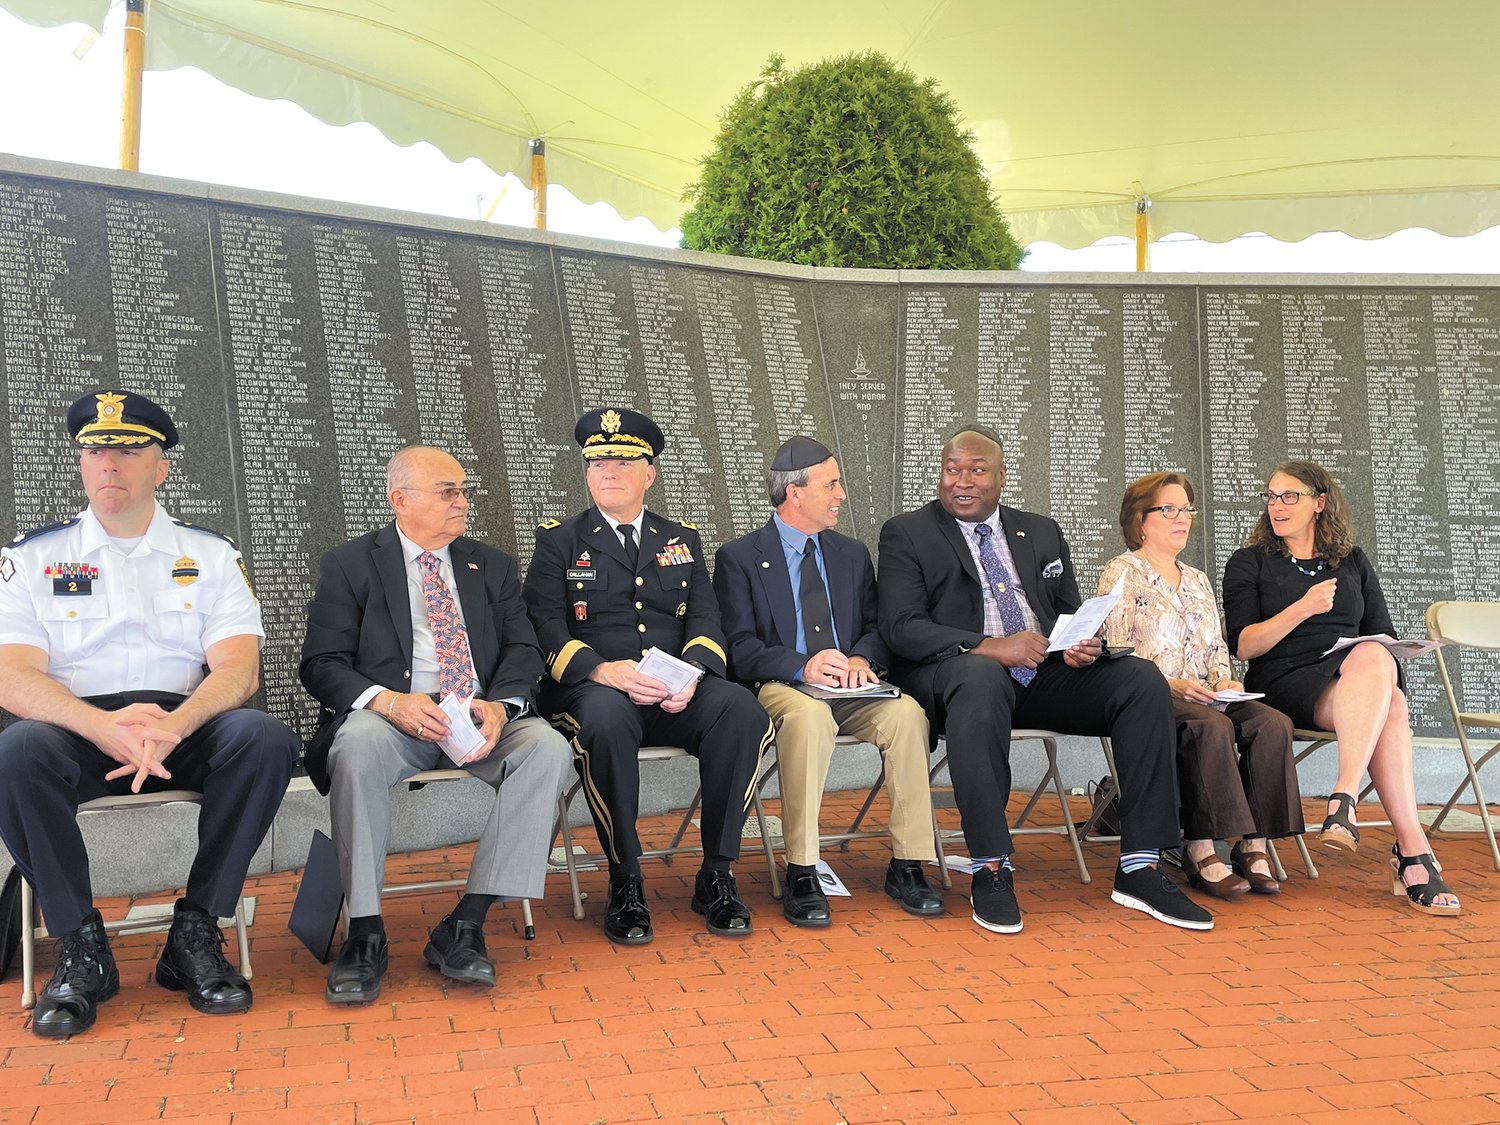 WHAT MEMORIAL DAY MEANS TO US: The speakers at the Jewish War Veterans Memorial Ceremony on Sunday, May 29 included the following: (left to right) Deputy Police Chief of Warwick Commander Mark Ullucci, Representative Samuel Azzinaro from the House Veterans Affairs Committee, Major General Christopher Callahan, Mayor of Warwick Frank Picozzi, Director of Veteran's Affairs for RI Kassim Yarn, Cantor Judy Seplowin and Rabbi Sarah Mack.